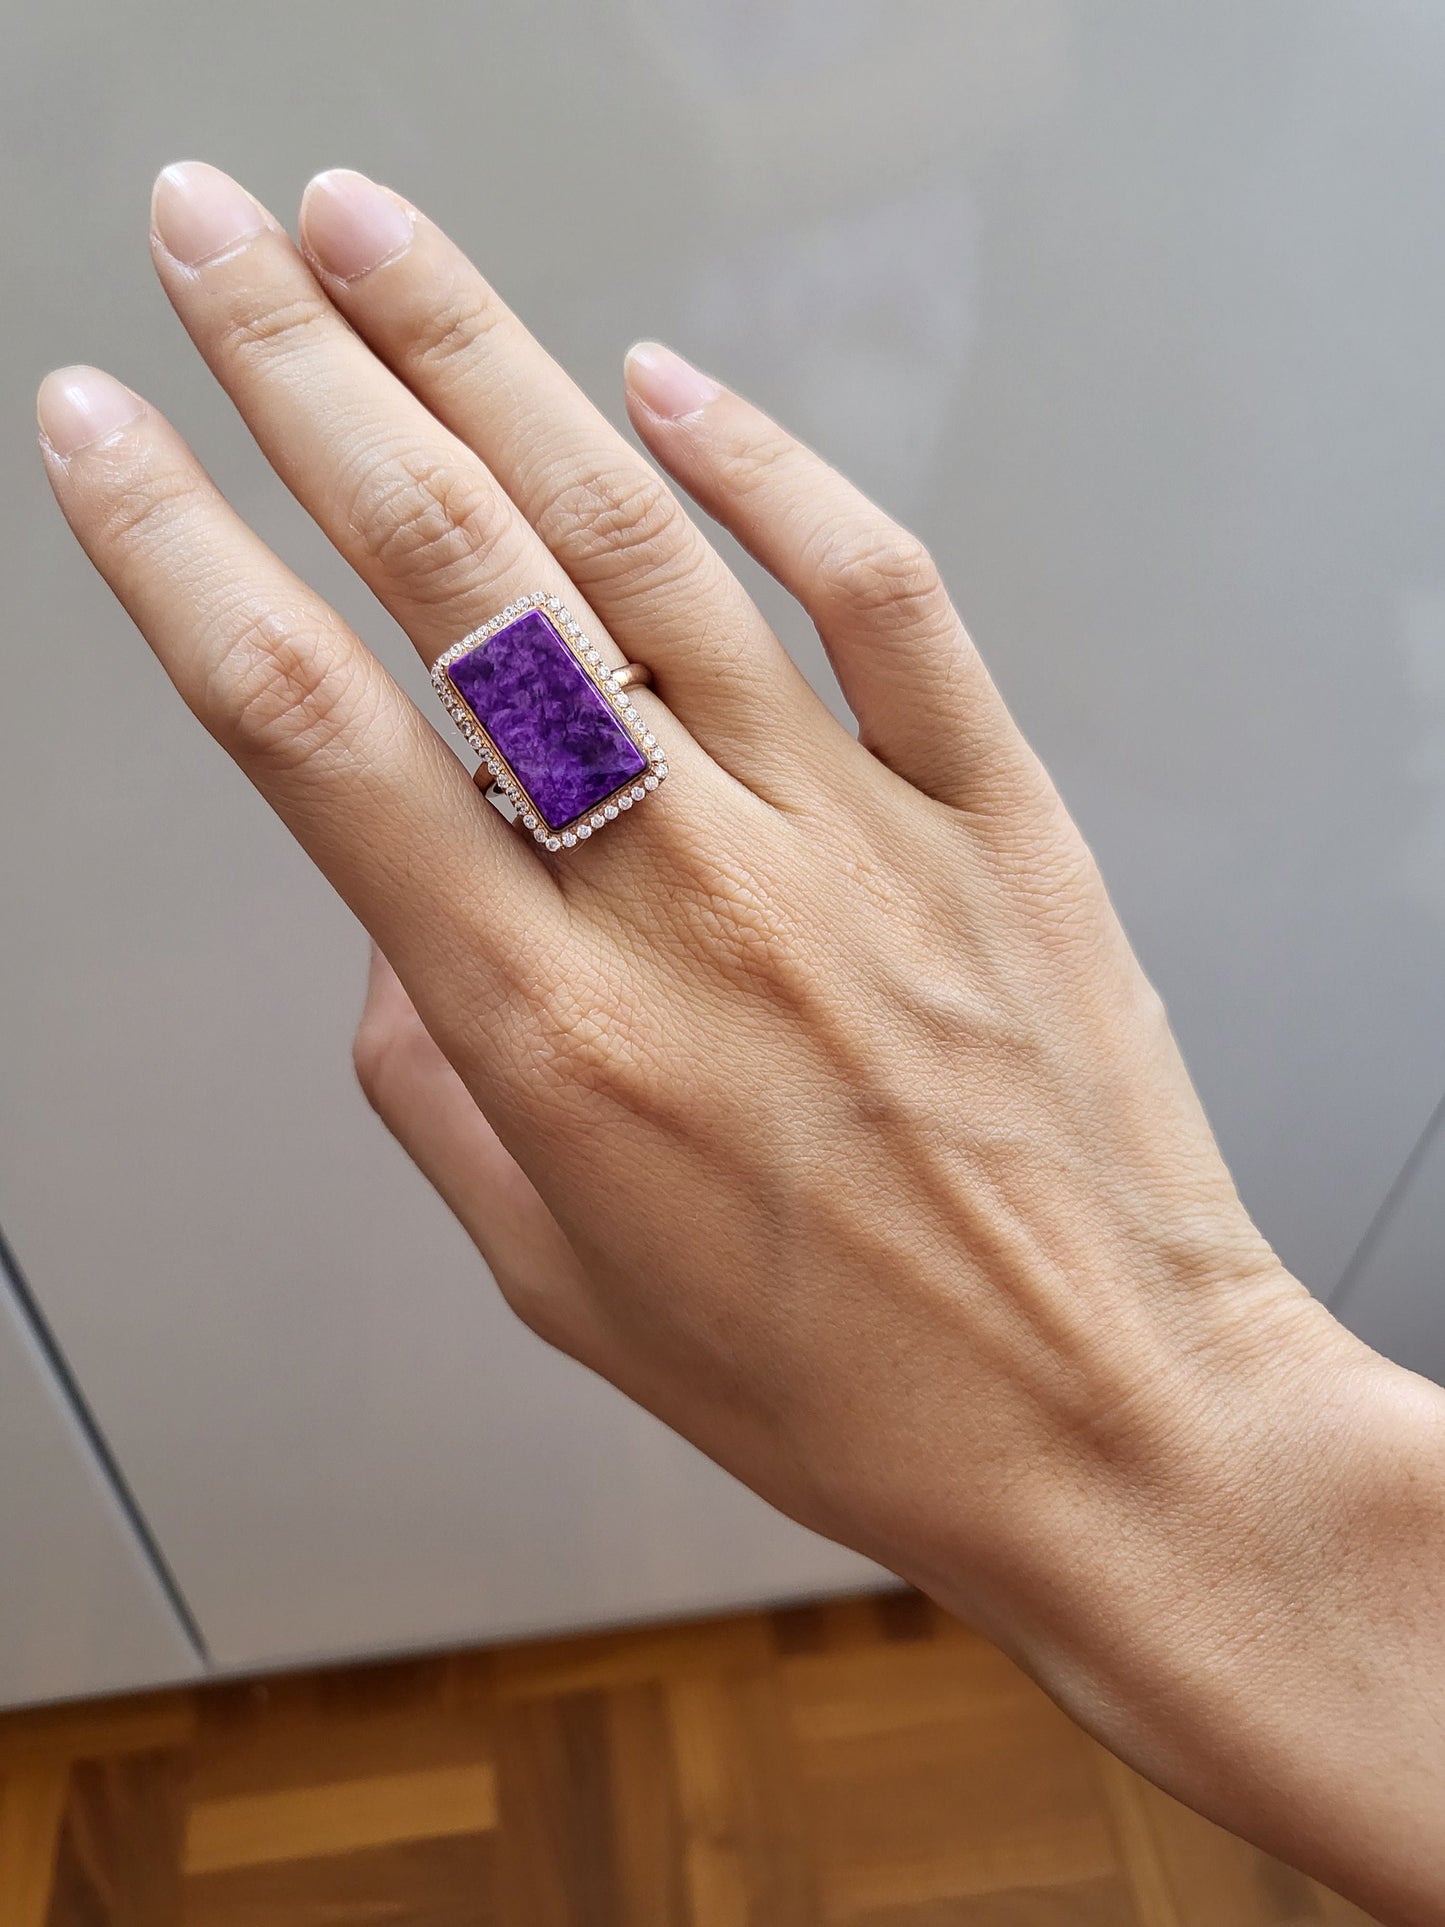 Natural Purple Sugilite Cat-eye Rectangle adjustable Rose Gold Statement Ring with Crystals